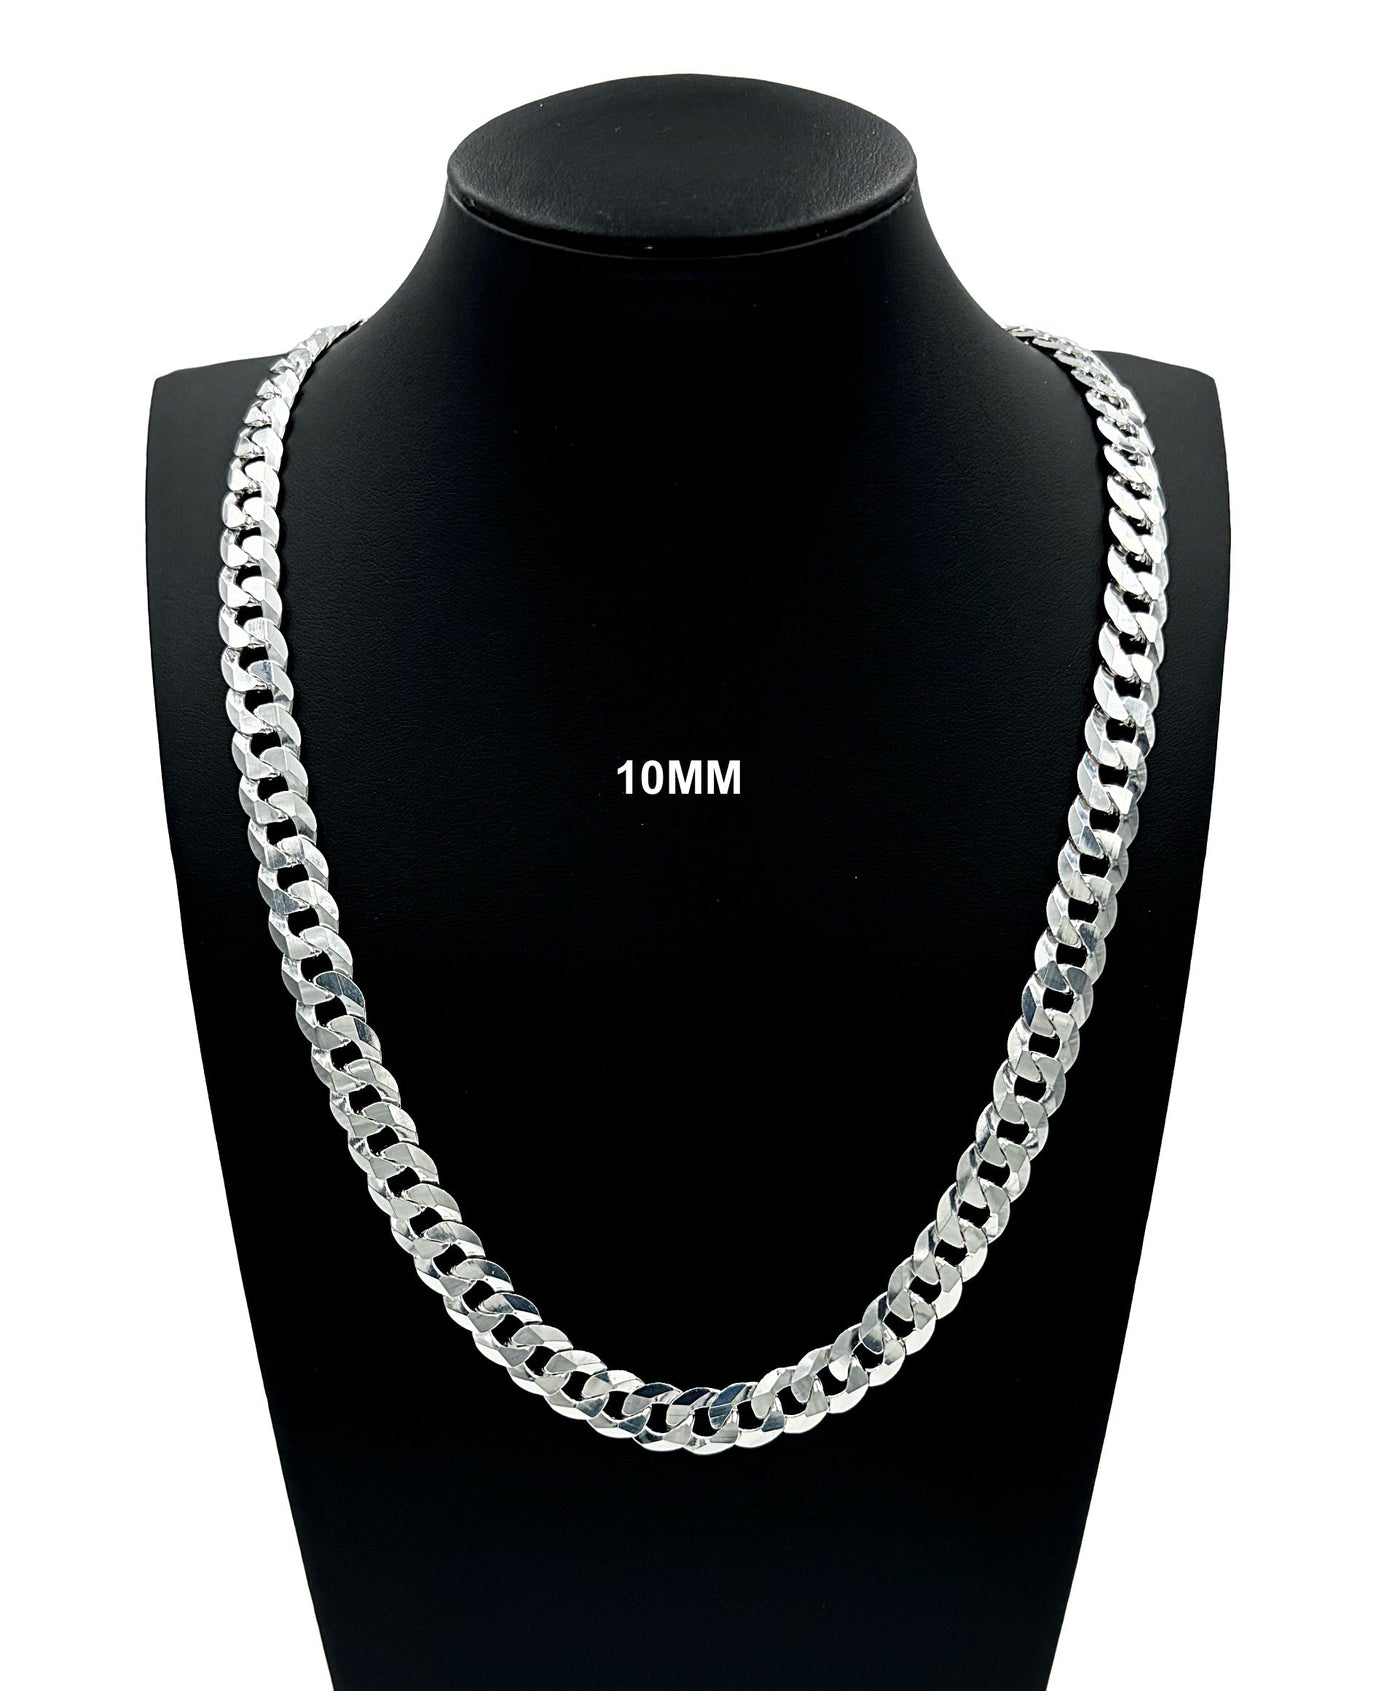 10MM Real Solid 925 Sterling Silver Curb Cuban Link Chain Pendant Necklace UNISEX